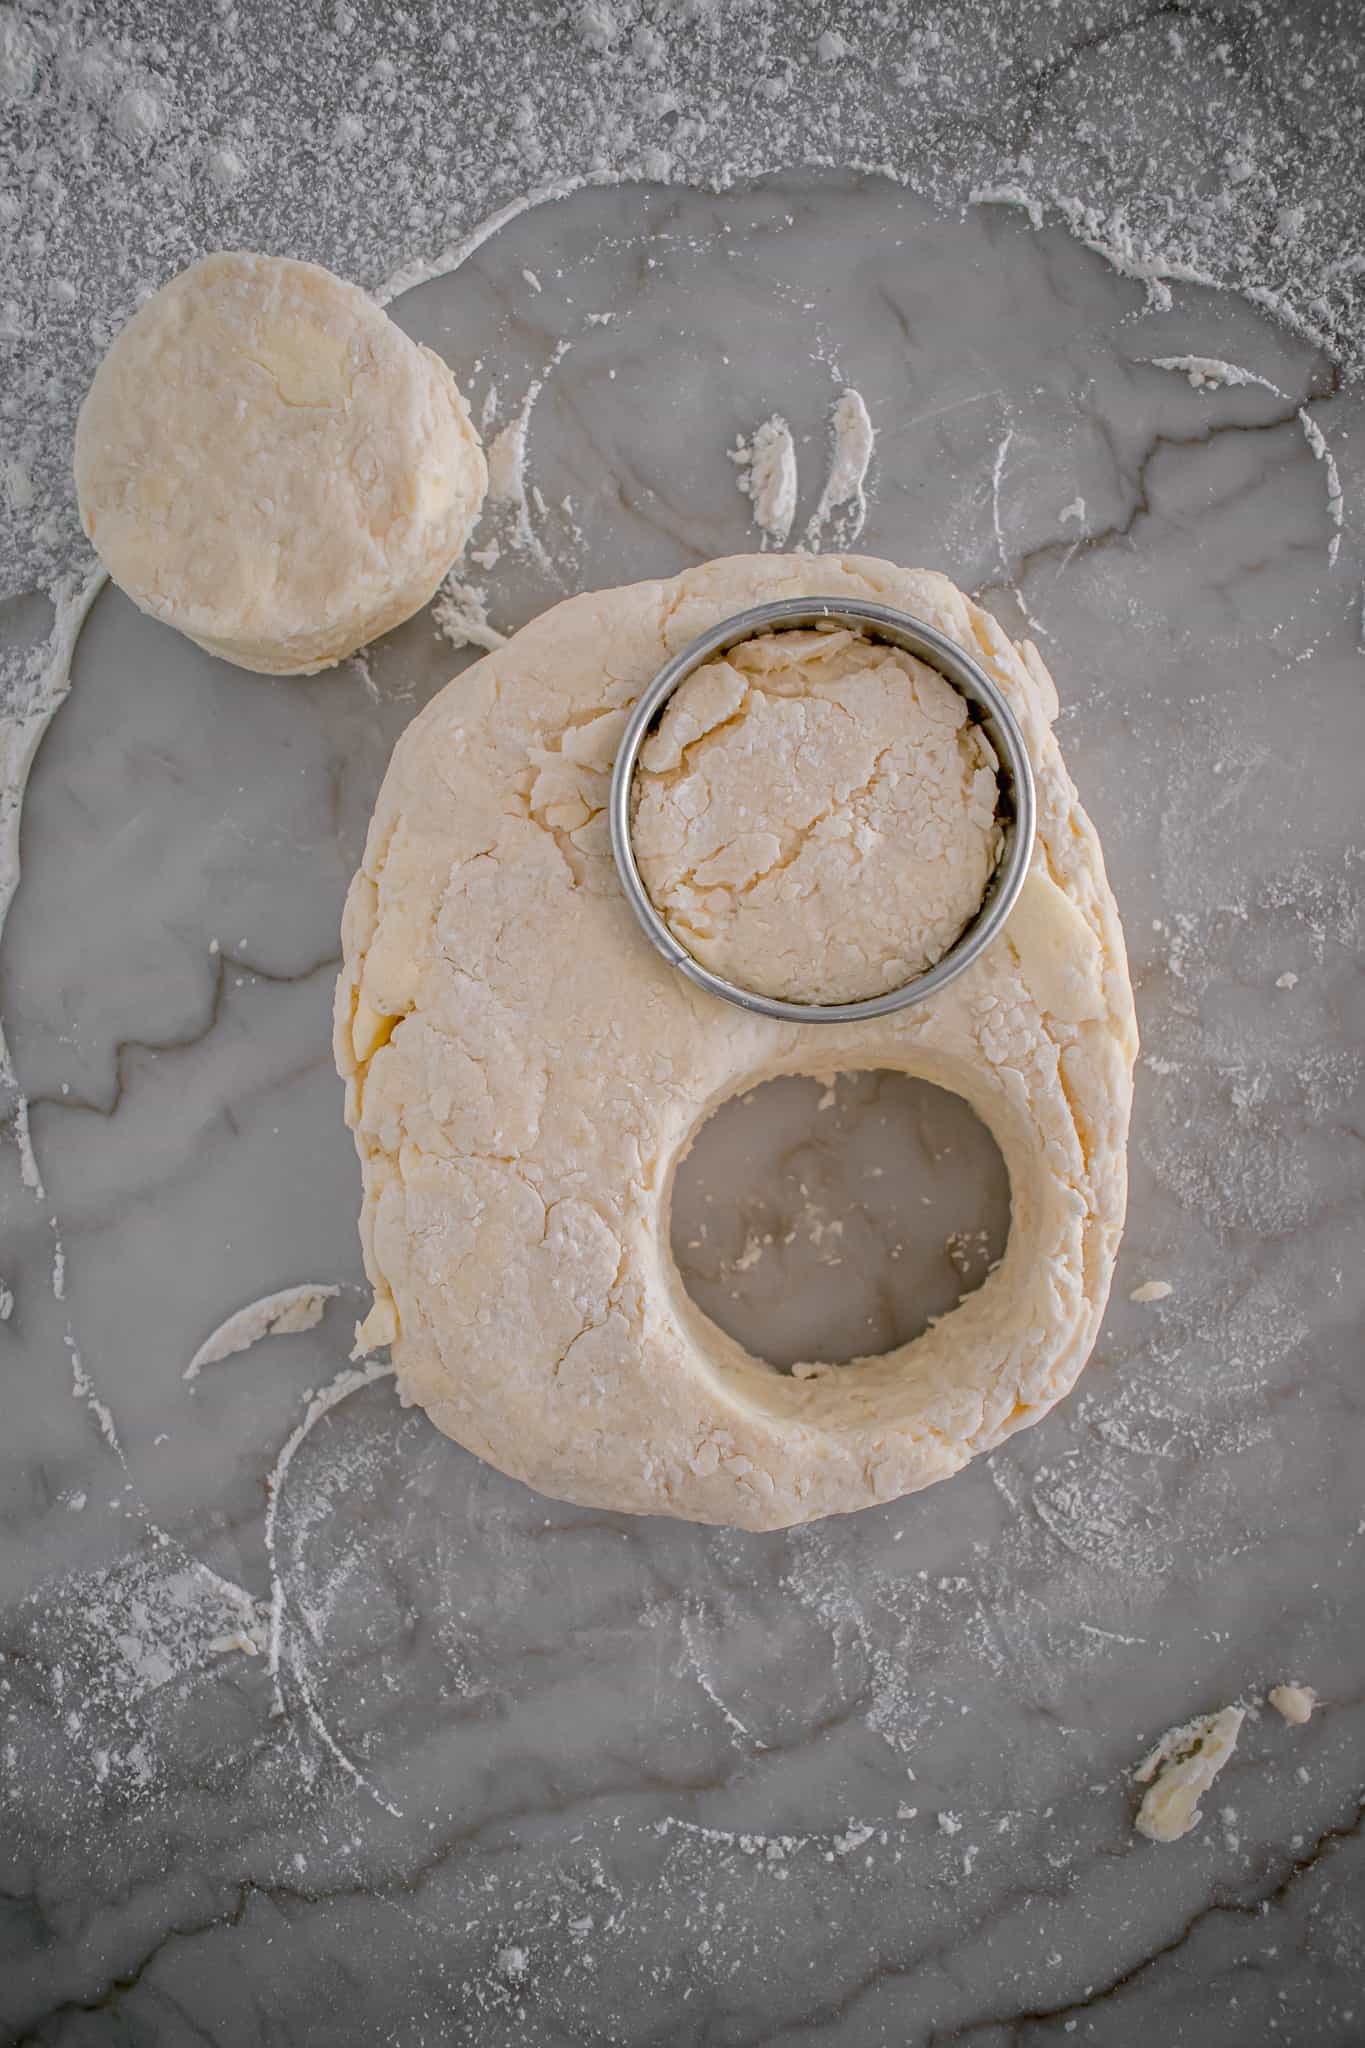 biscuit dough rolled out with biscuits being cut.